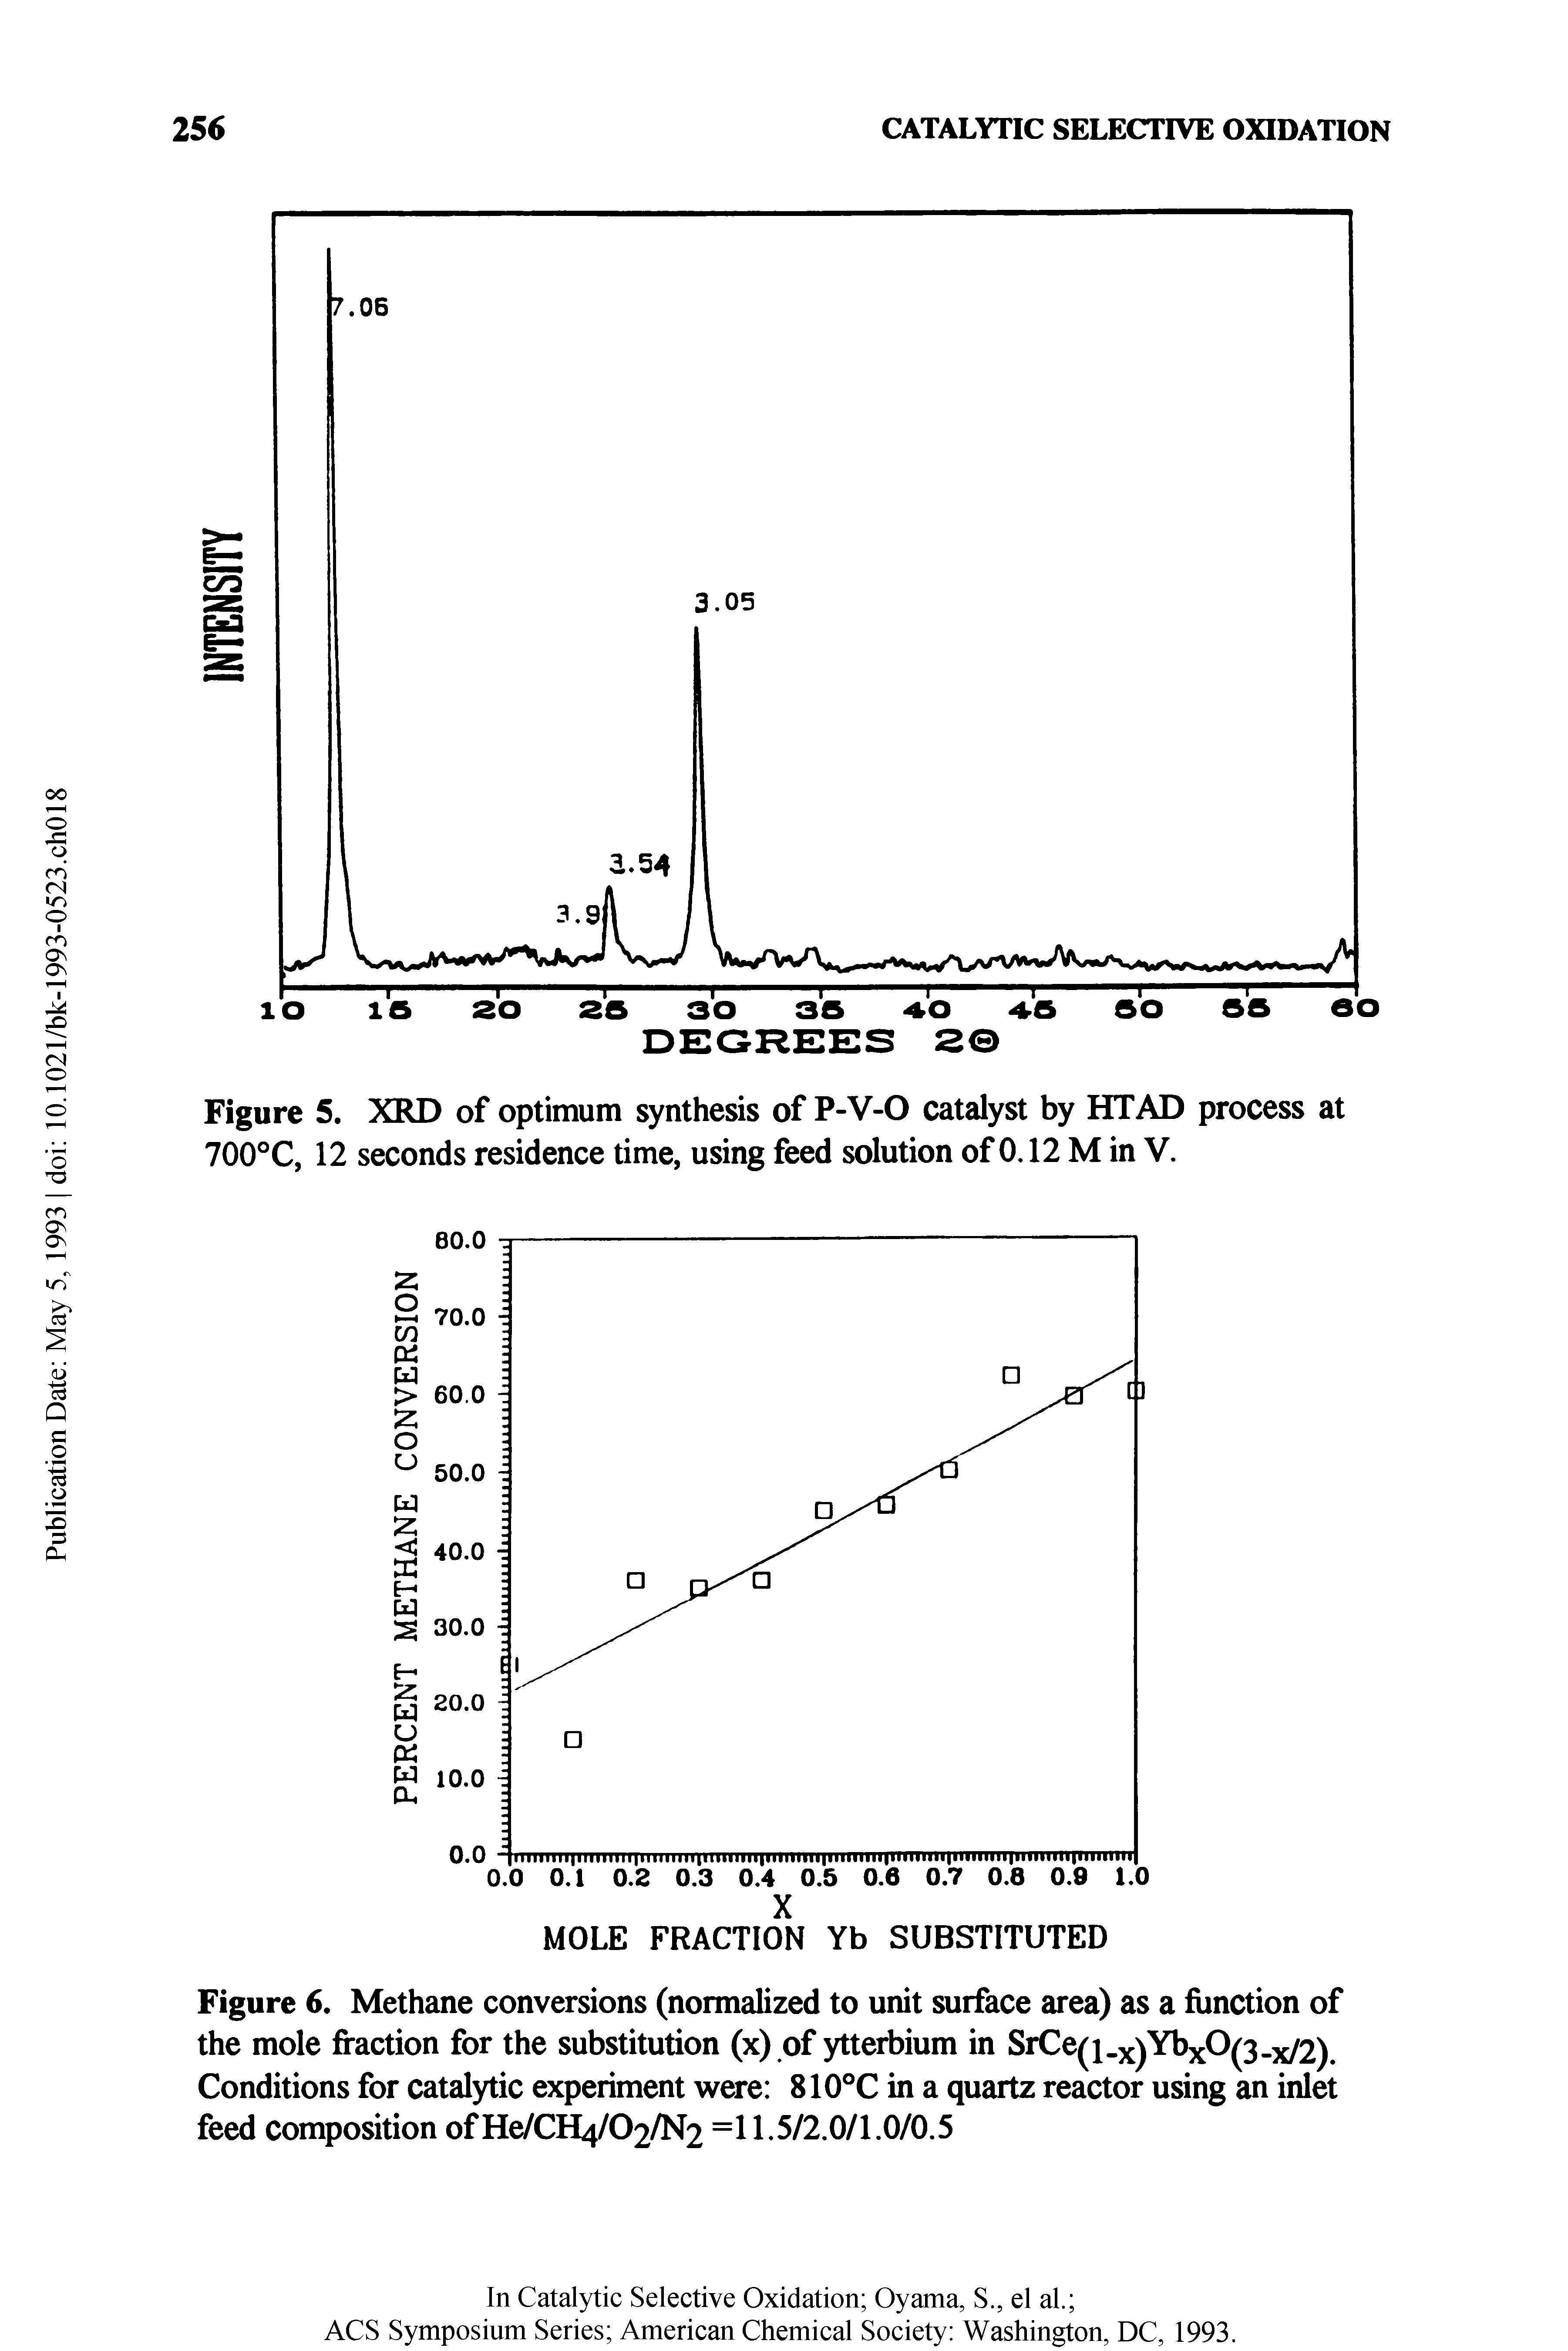 Figure 6. Methane conversions (normalized to unit surface area) as a function of the mole fraction for the substitution (x) of ytterbium in SrCe i.x)YbxO(3 x/2). Conditions for catalytic experiment were 810°C in a quartz reactor using an inlet feed composition ofHe/C /02/N2 =11.5/2.0/1.0/0.5...